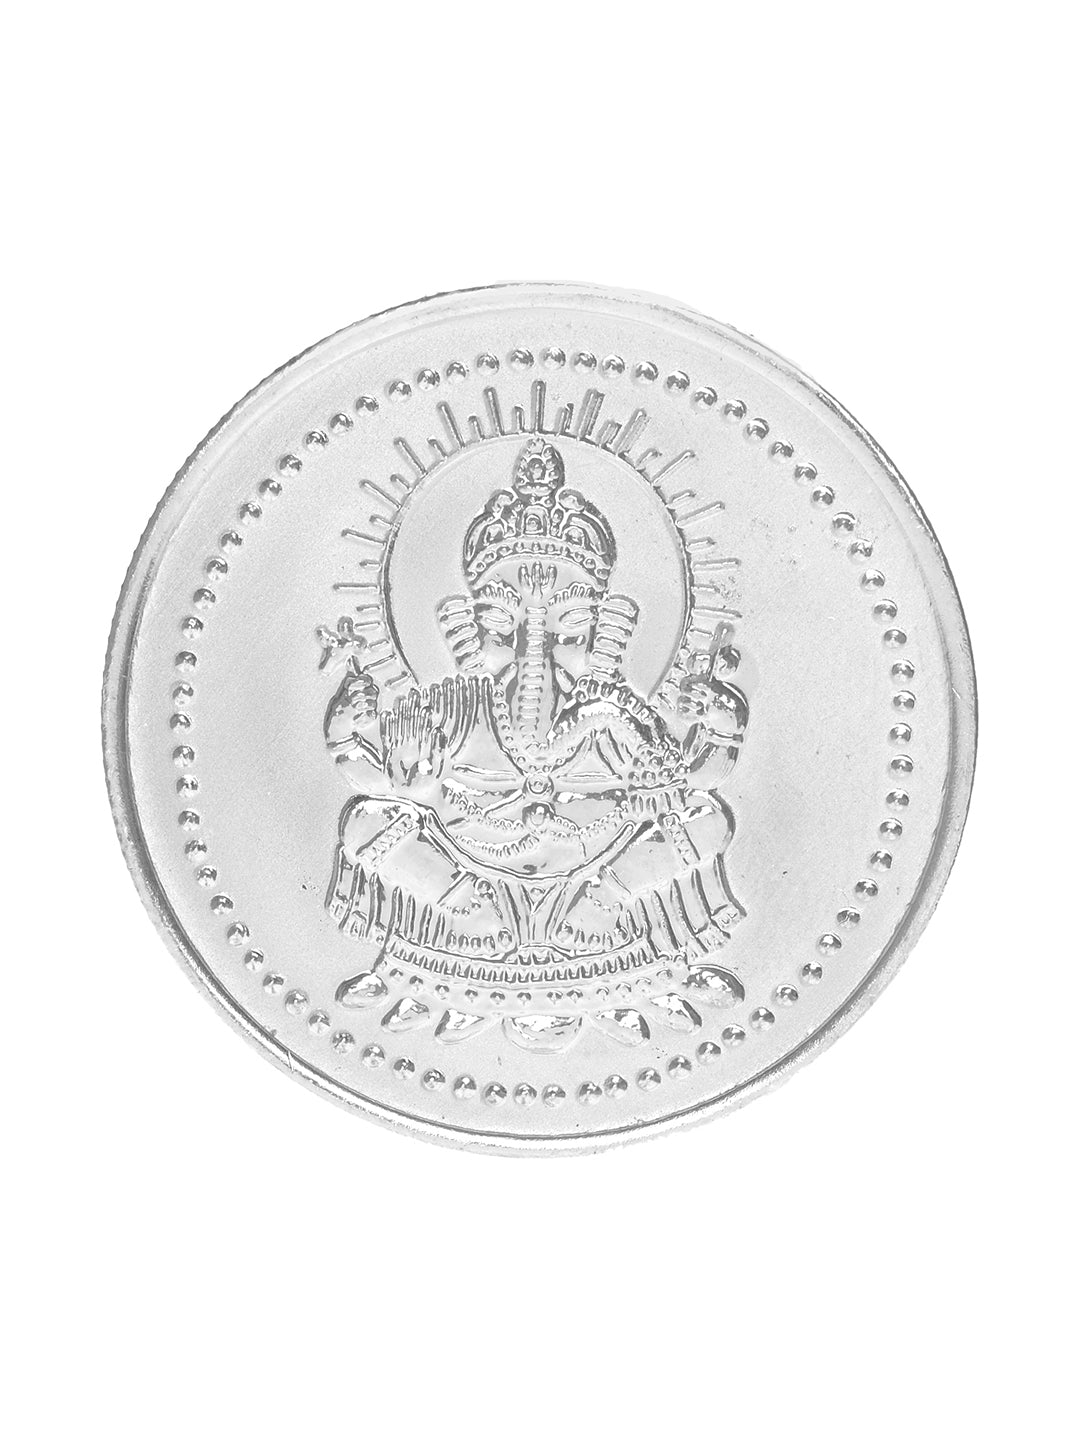 Lord Ganapati 10 gram 999 Round Silver Coin, zaveri pearls, sale price rs, sale price, sale gold plated, sale gold, sale, rubans, ring, regular price, priyassi jewellery, kushal's - Saraf RS 